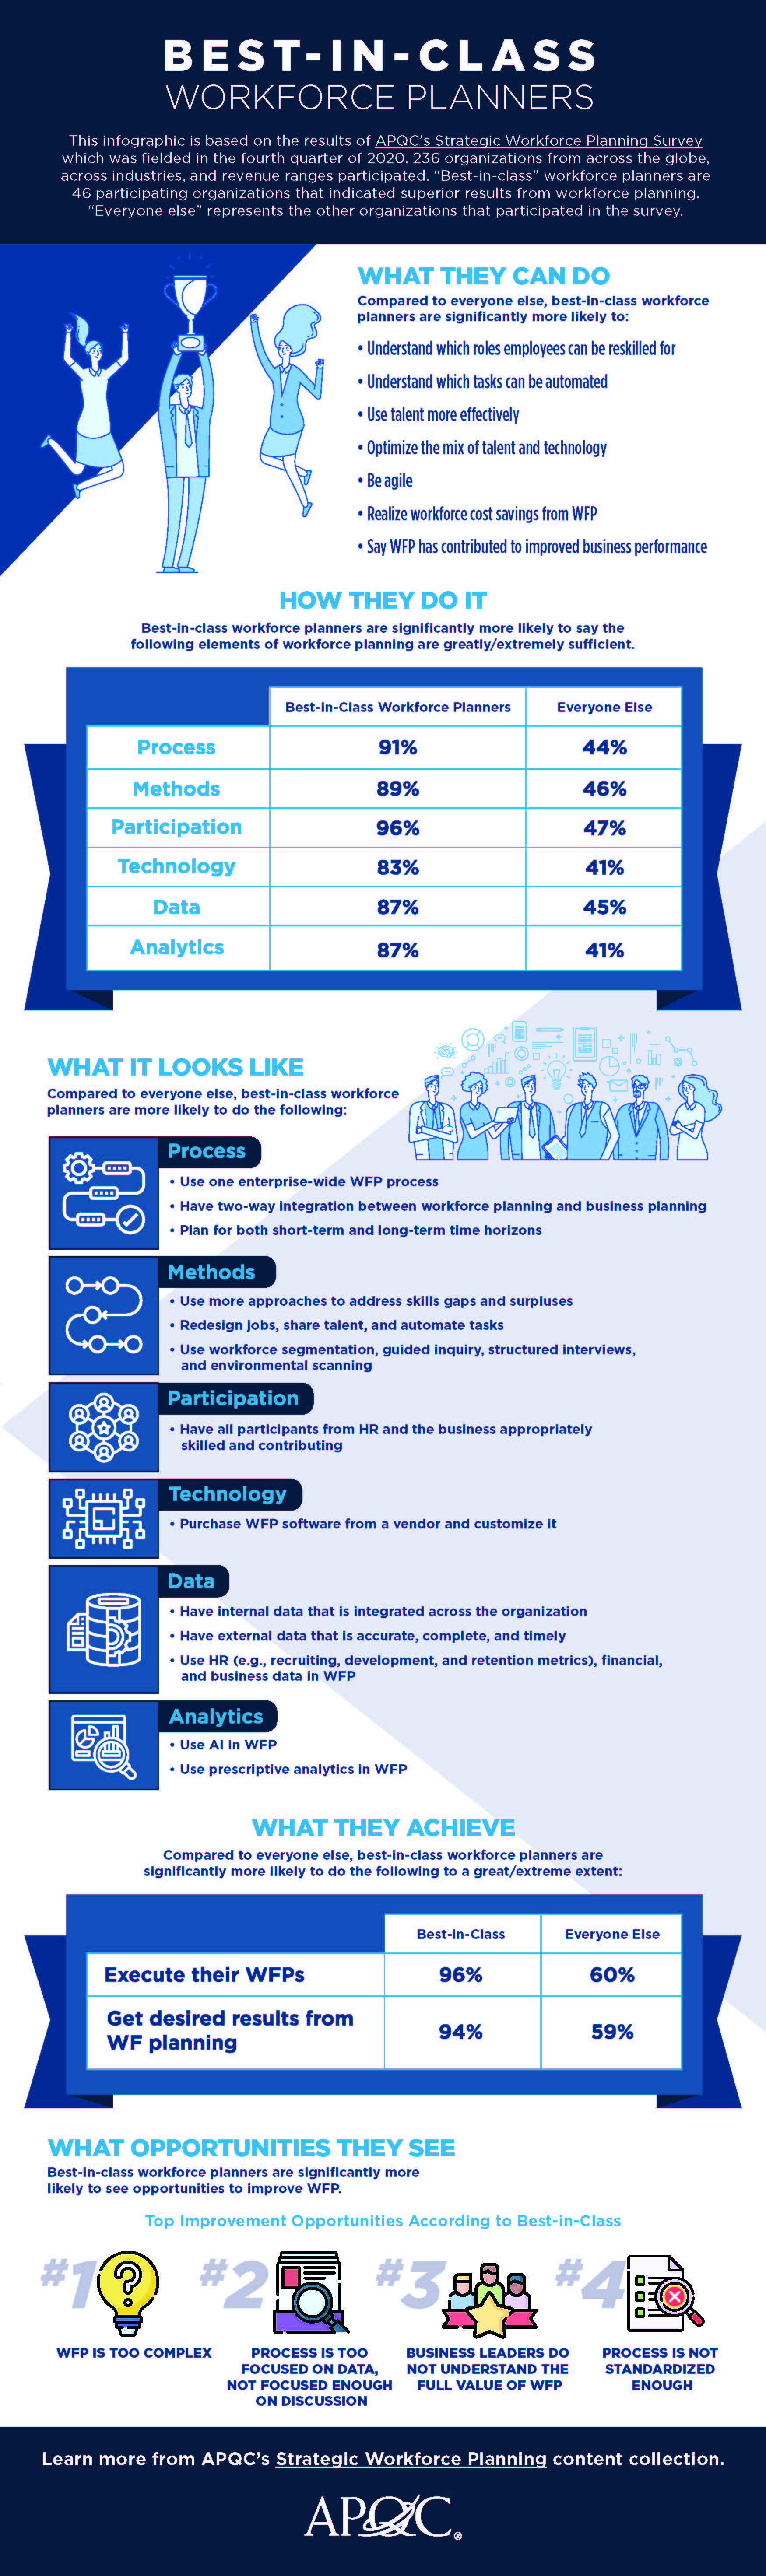 INFOGRAPHIC: Best-in-Class Workforce Planners Approach & Results